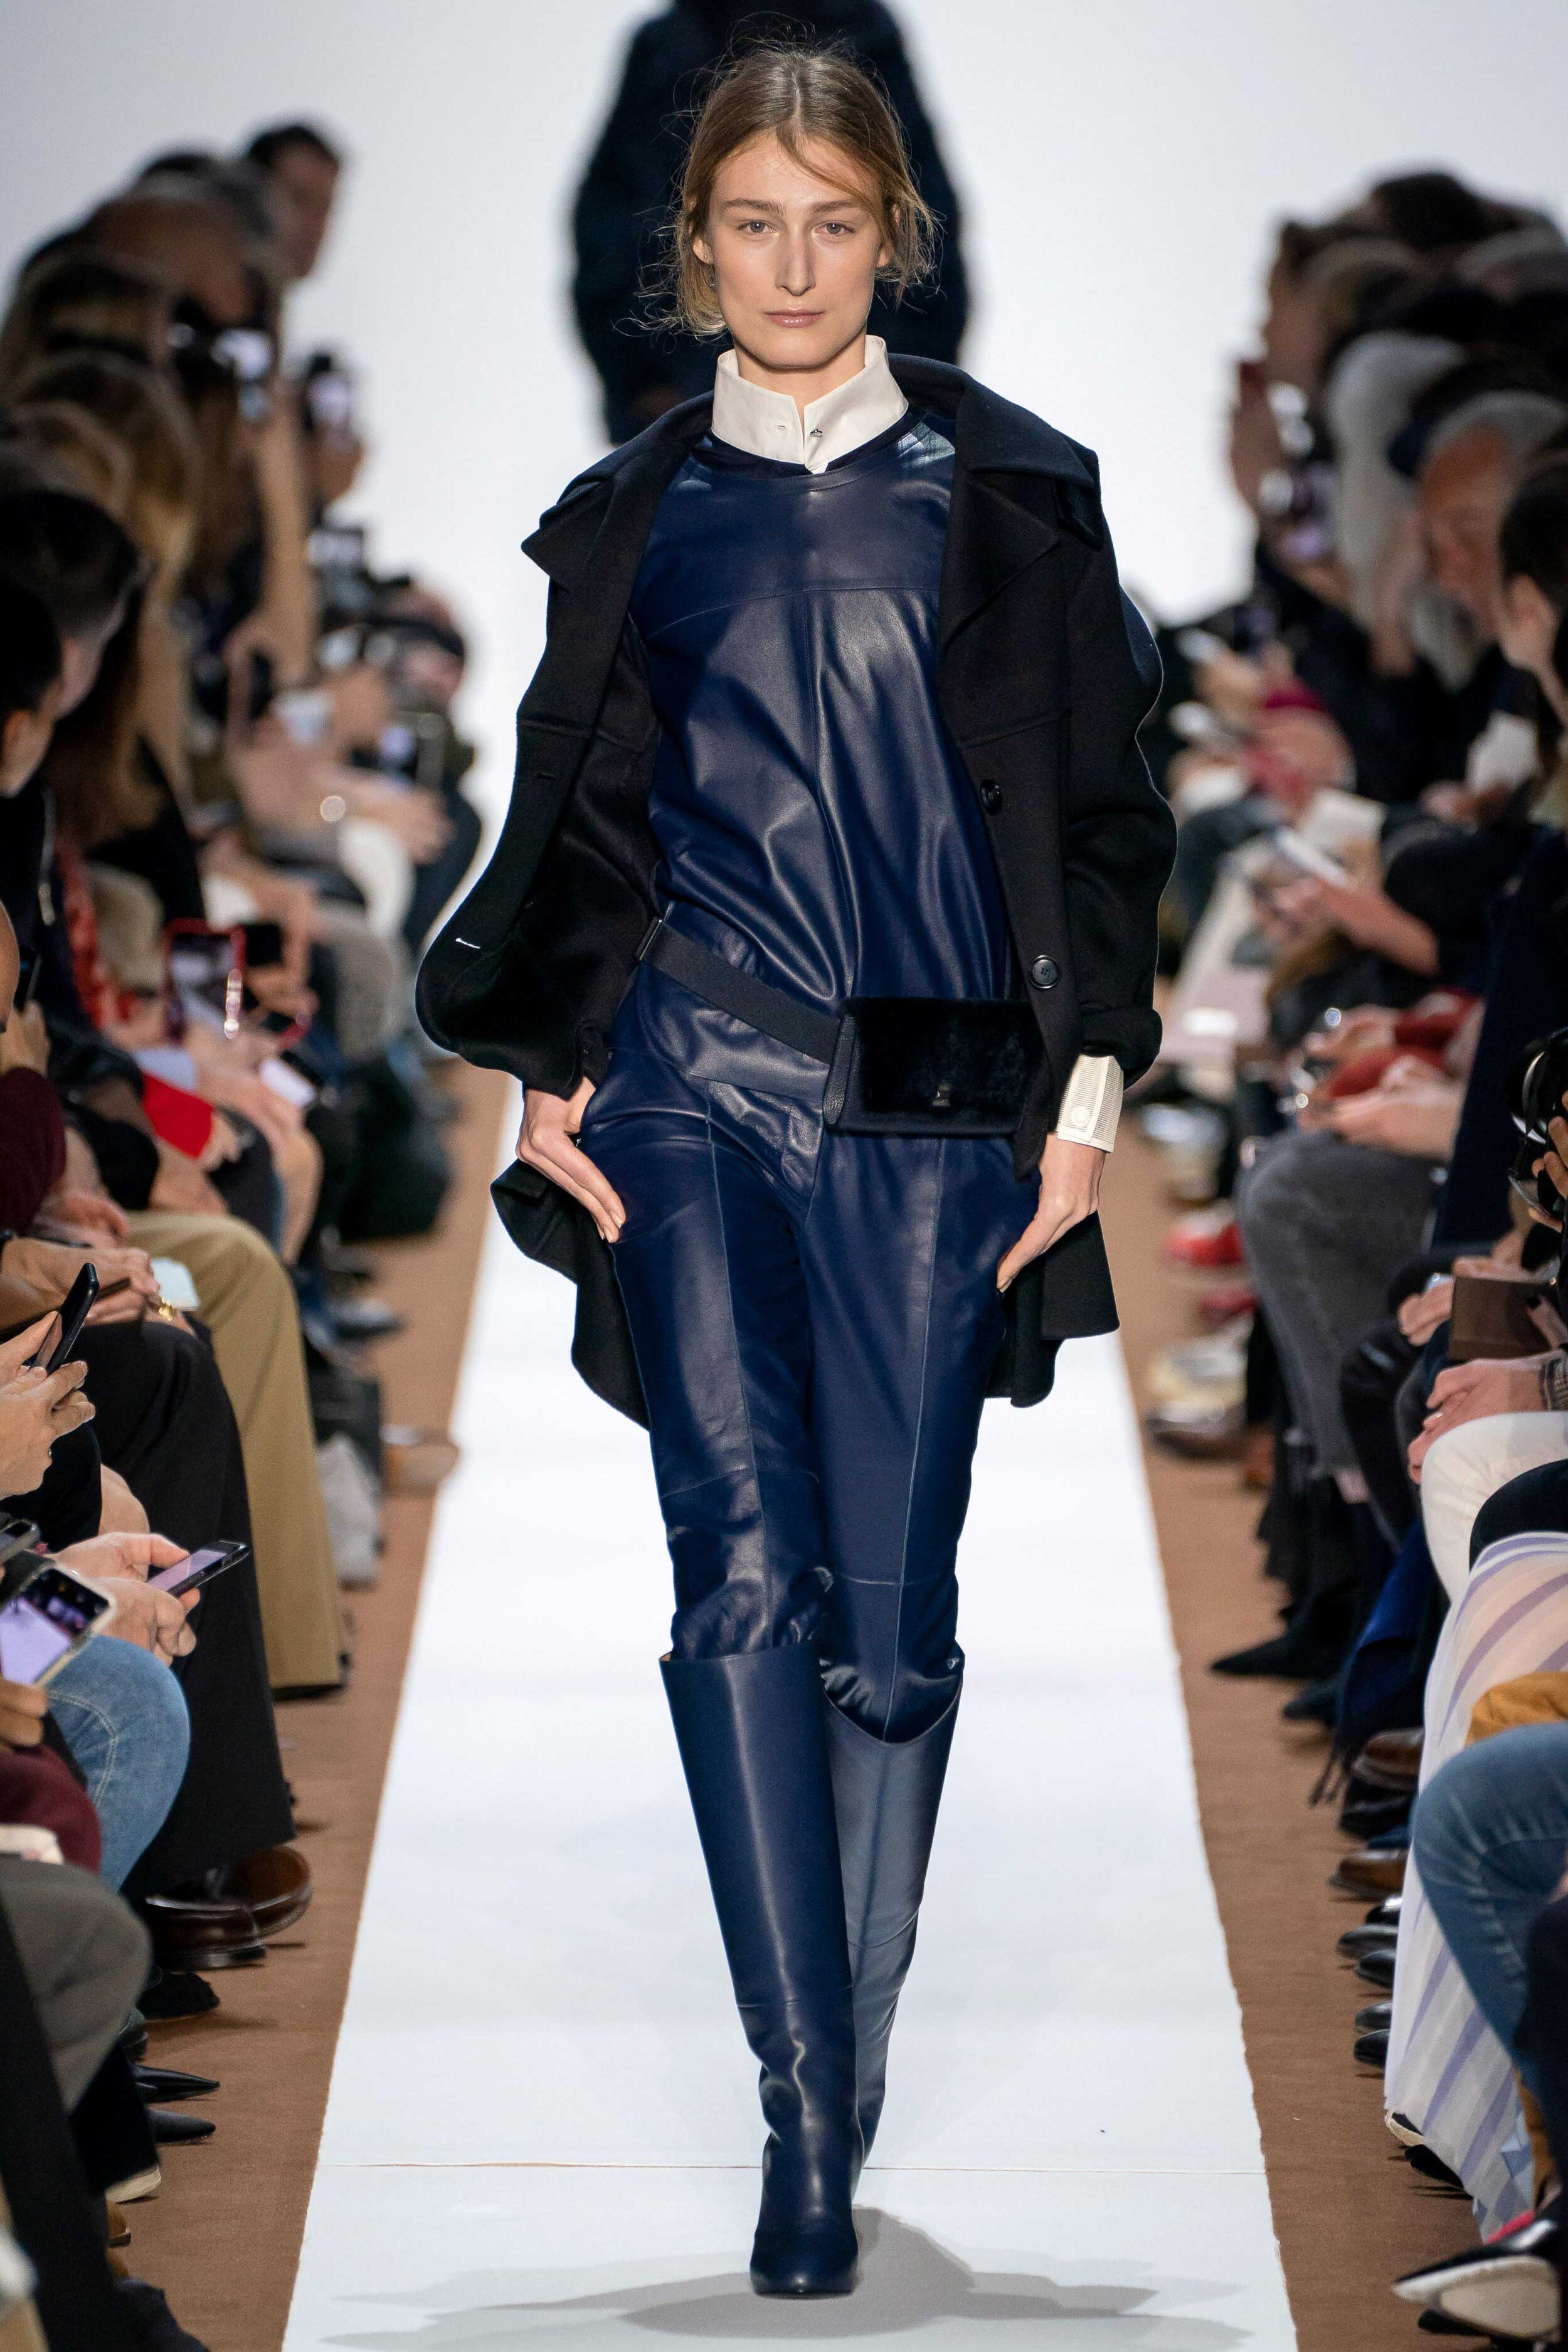 Akris-Runway-Fall-Winter-2019-Fall-Winter-2019-trends-Runway-coverage-Ready-To-Wear-Vogue-colored-leather.jpg